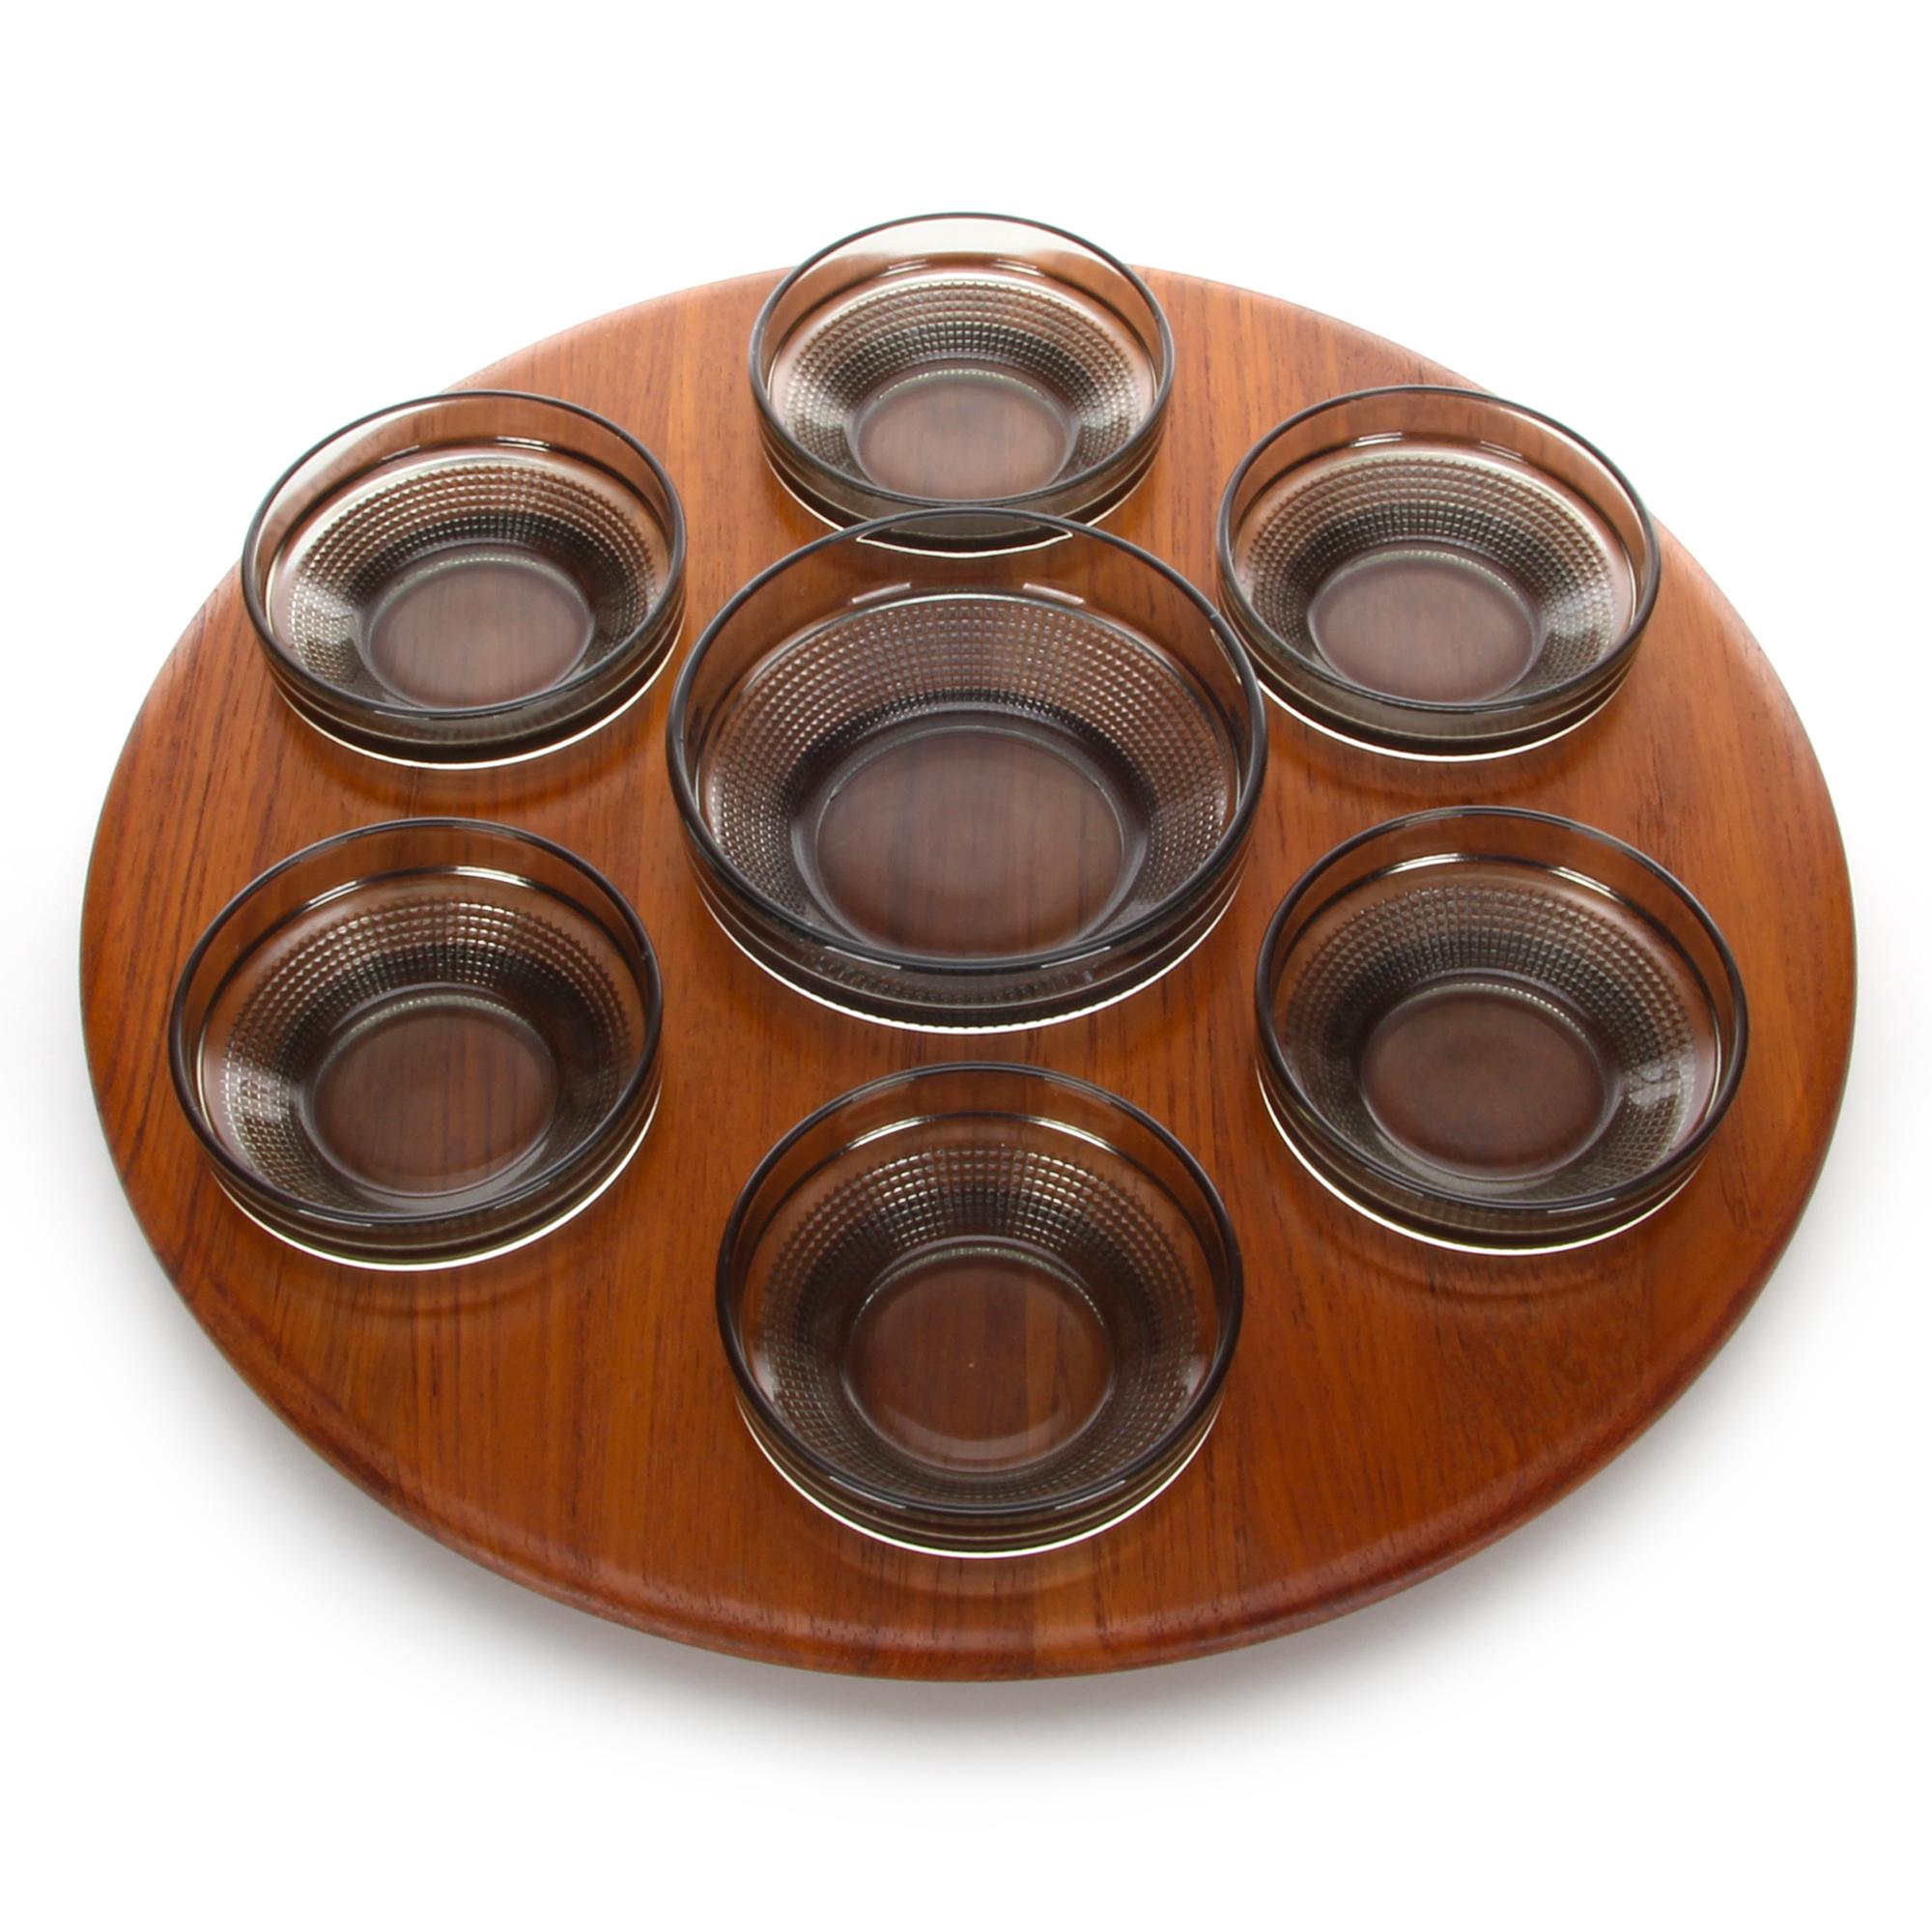 Lazy Susan, produced by Digsmed in 1964, Danish modern teak serving tray or platter, complete with seven original smokey glass bowls, in very good vintage condition.

A beautiful teak Lazy Susan featuring a soft rounded edge, circular indentations